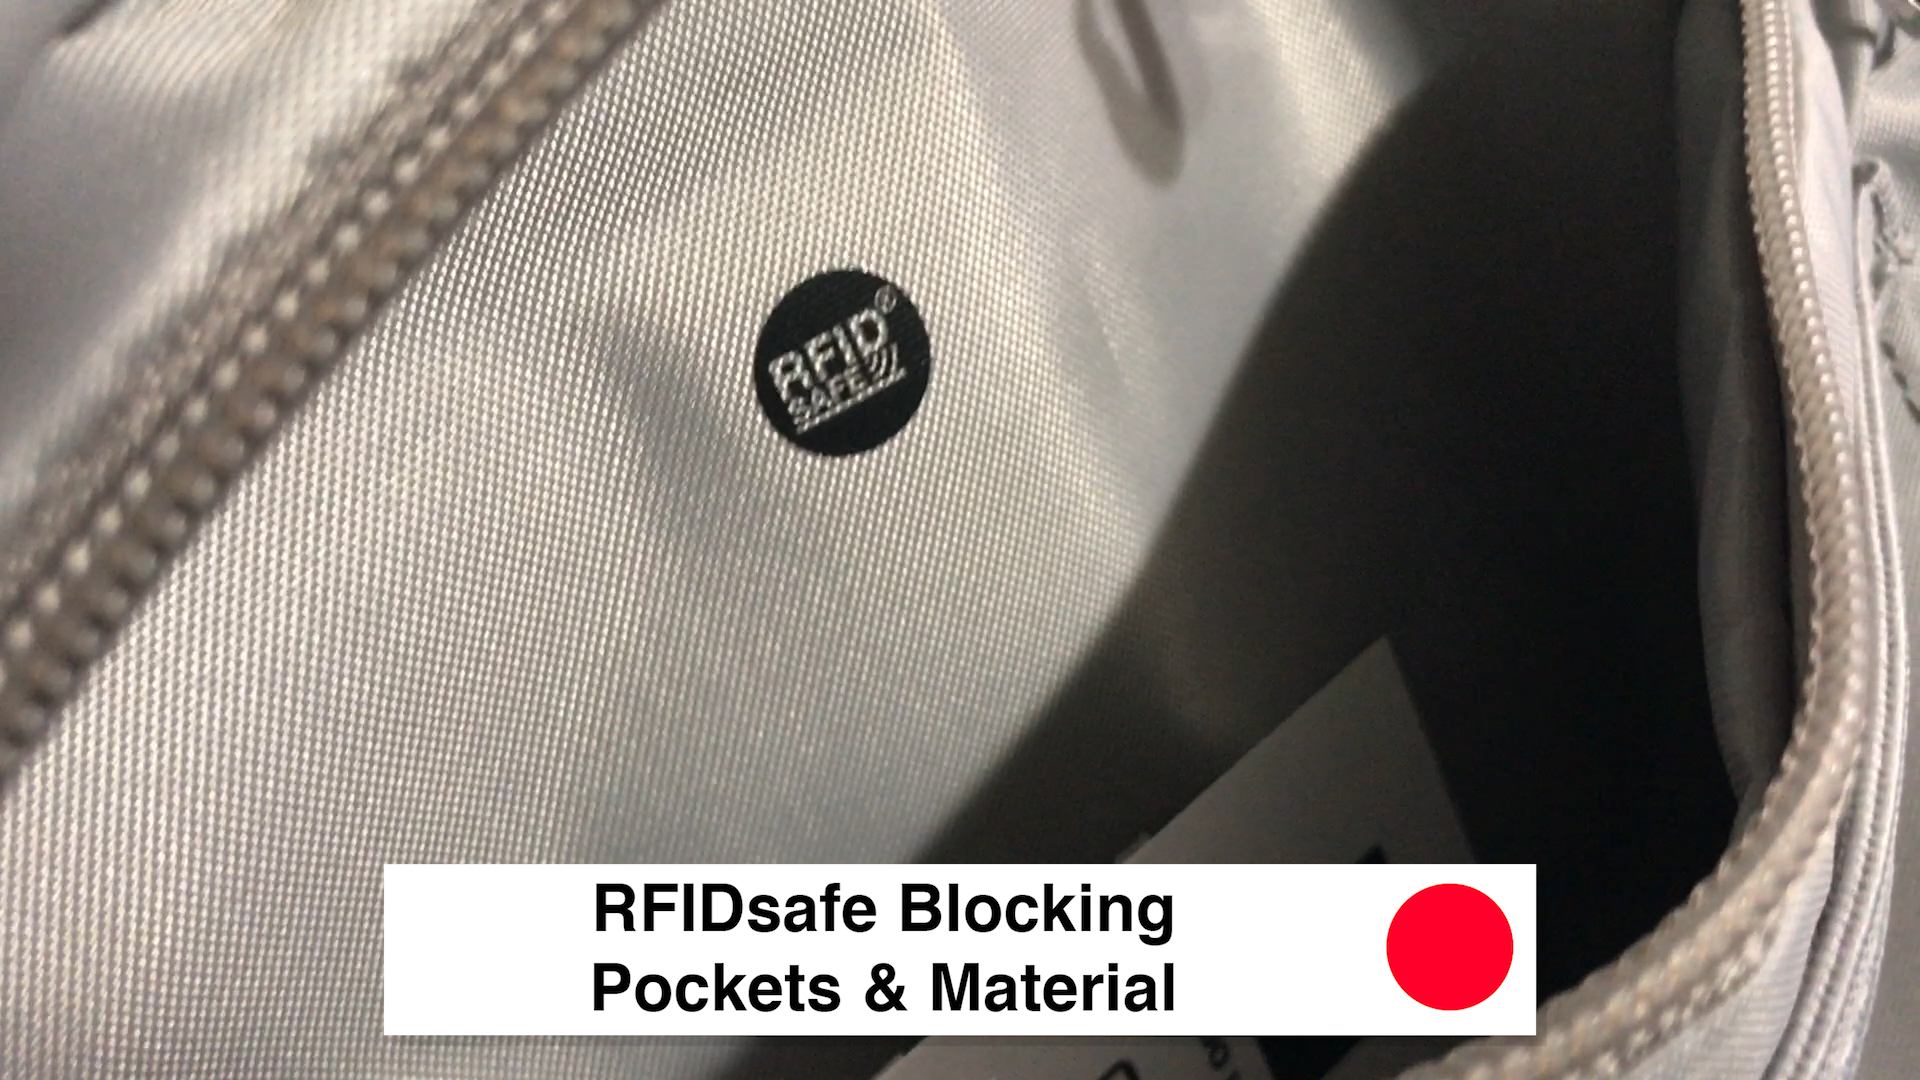 RFIDsafe Blocking Pockets and Material - Pacsafe Venturesafe X30 Travel Pack - Black Anti Theft Backpack